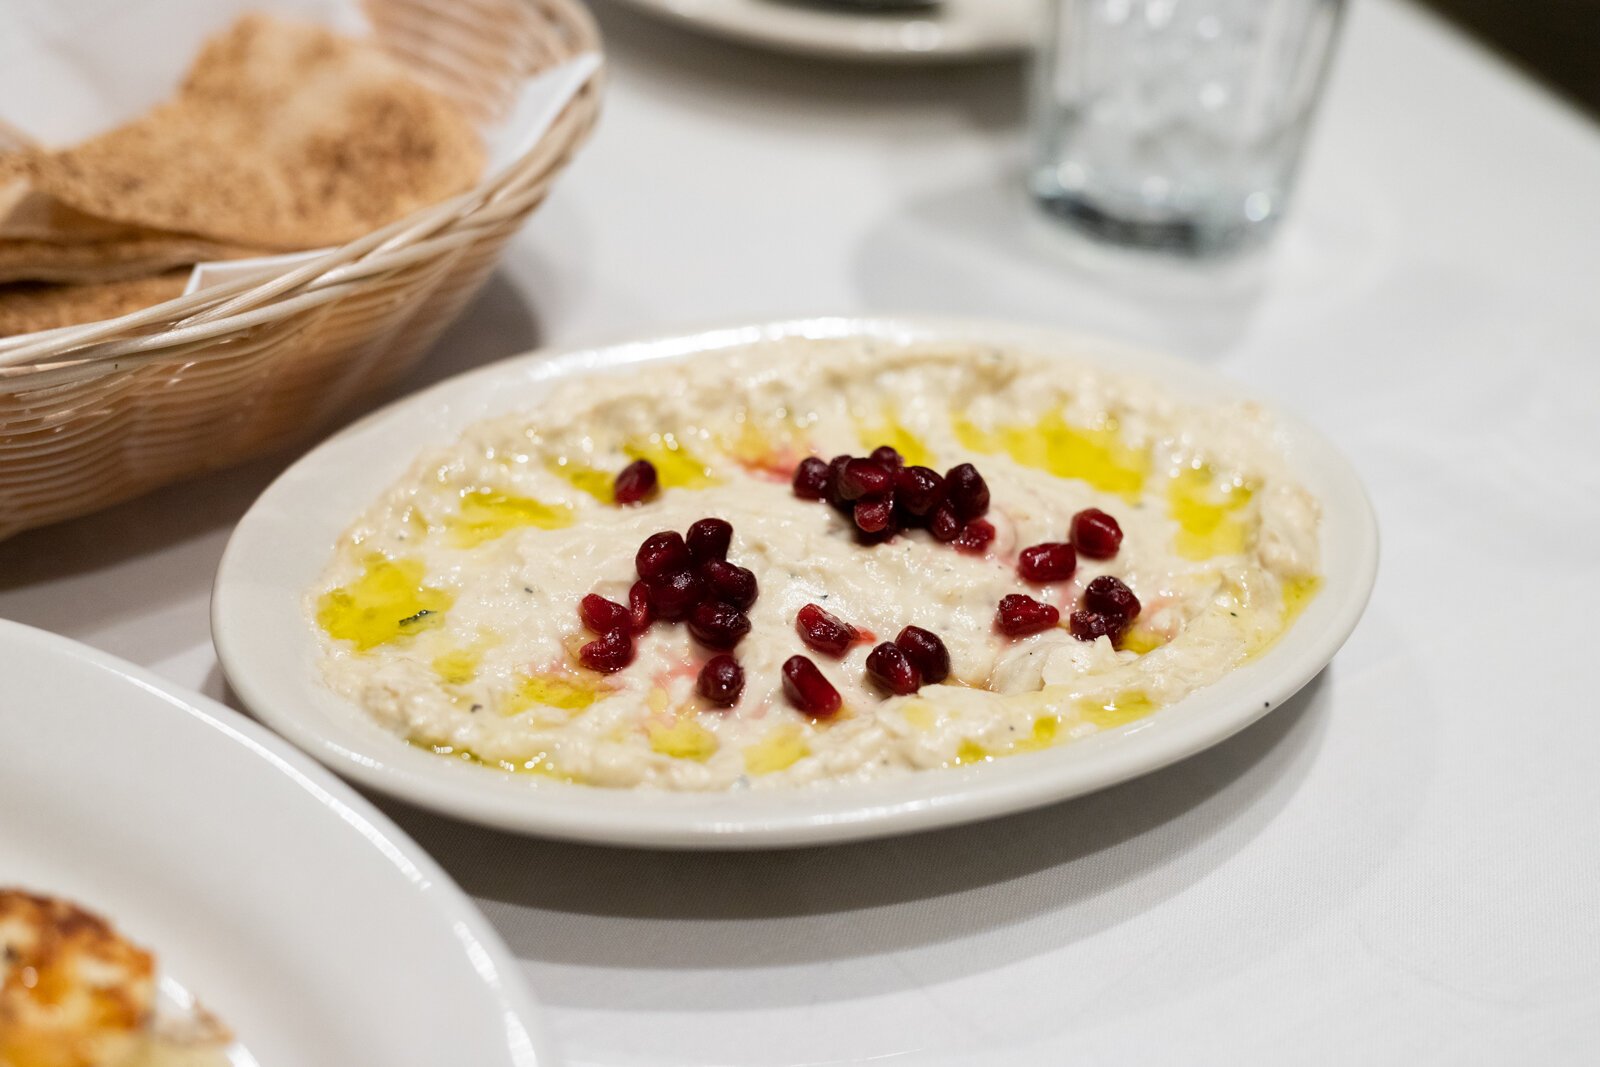 The baba ghanouj is a smoky eggplant dip that’s popular in the Middle East and parts of Northern Africa.